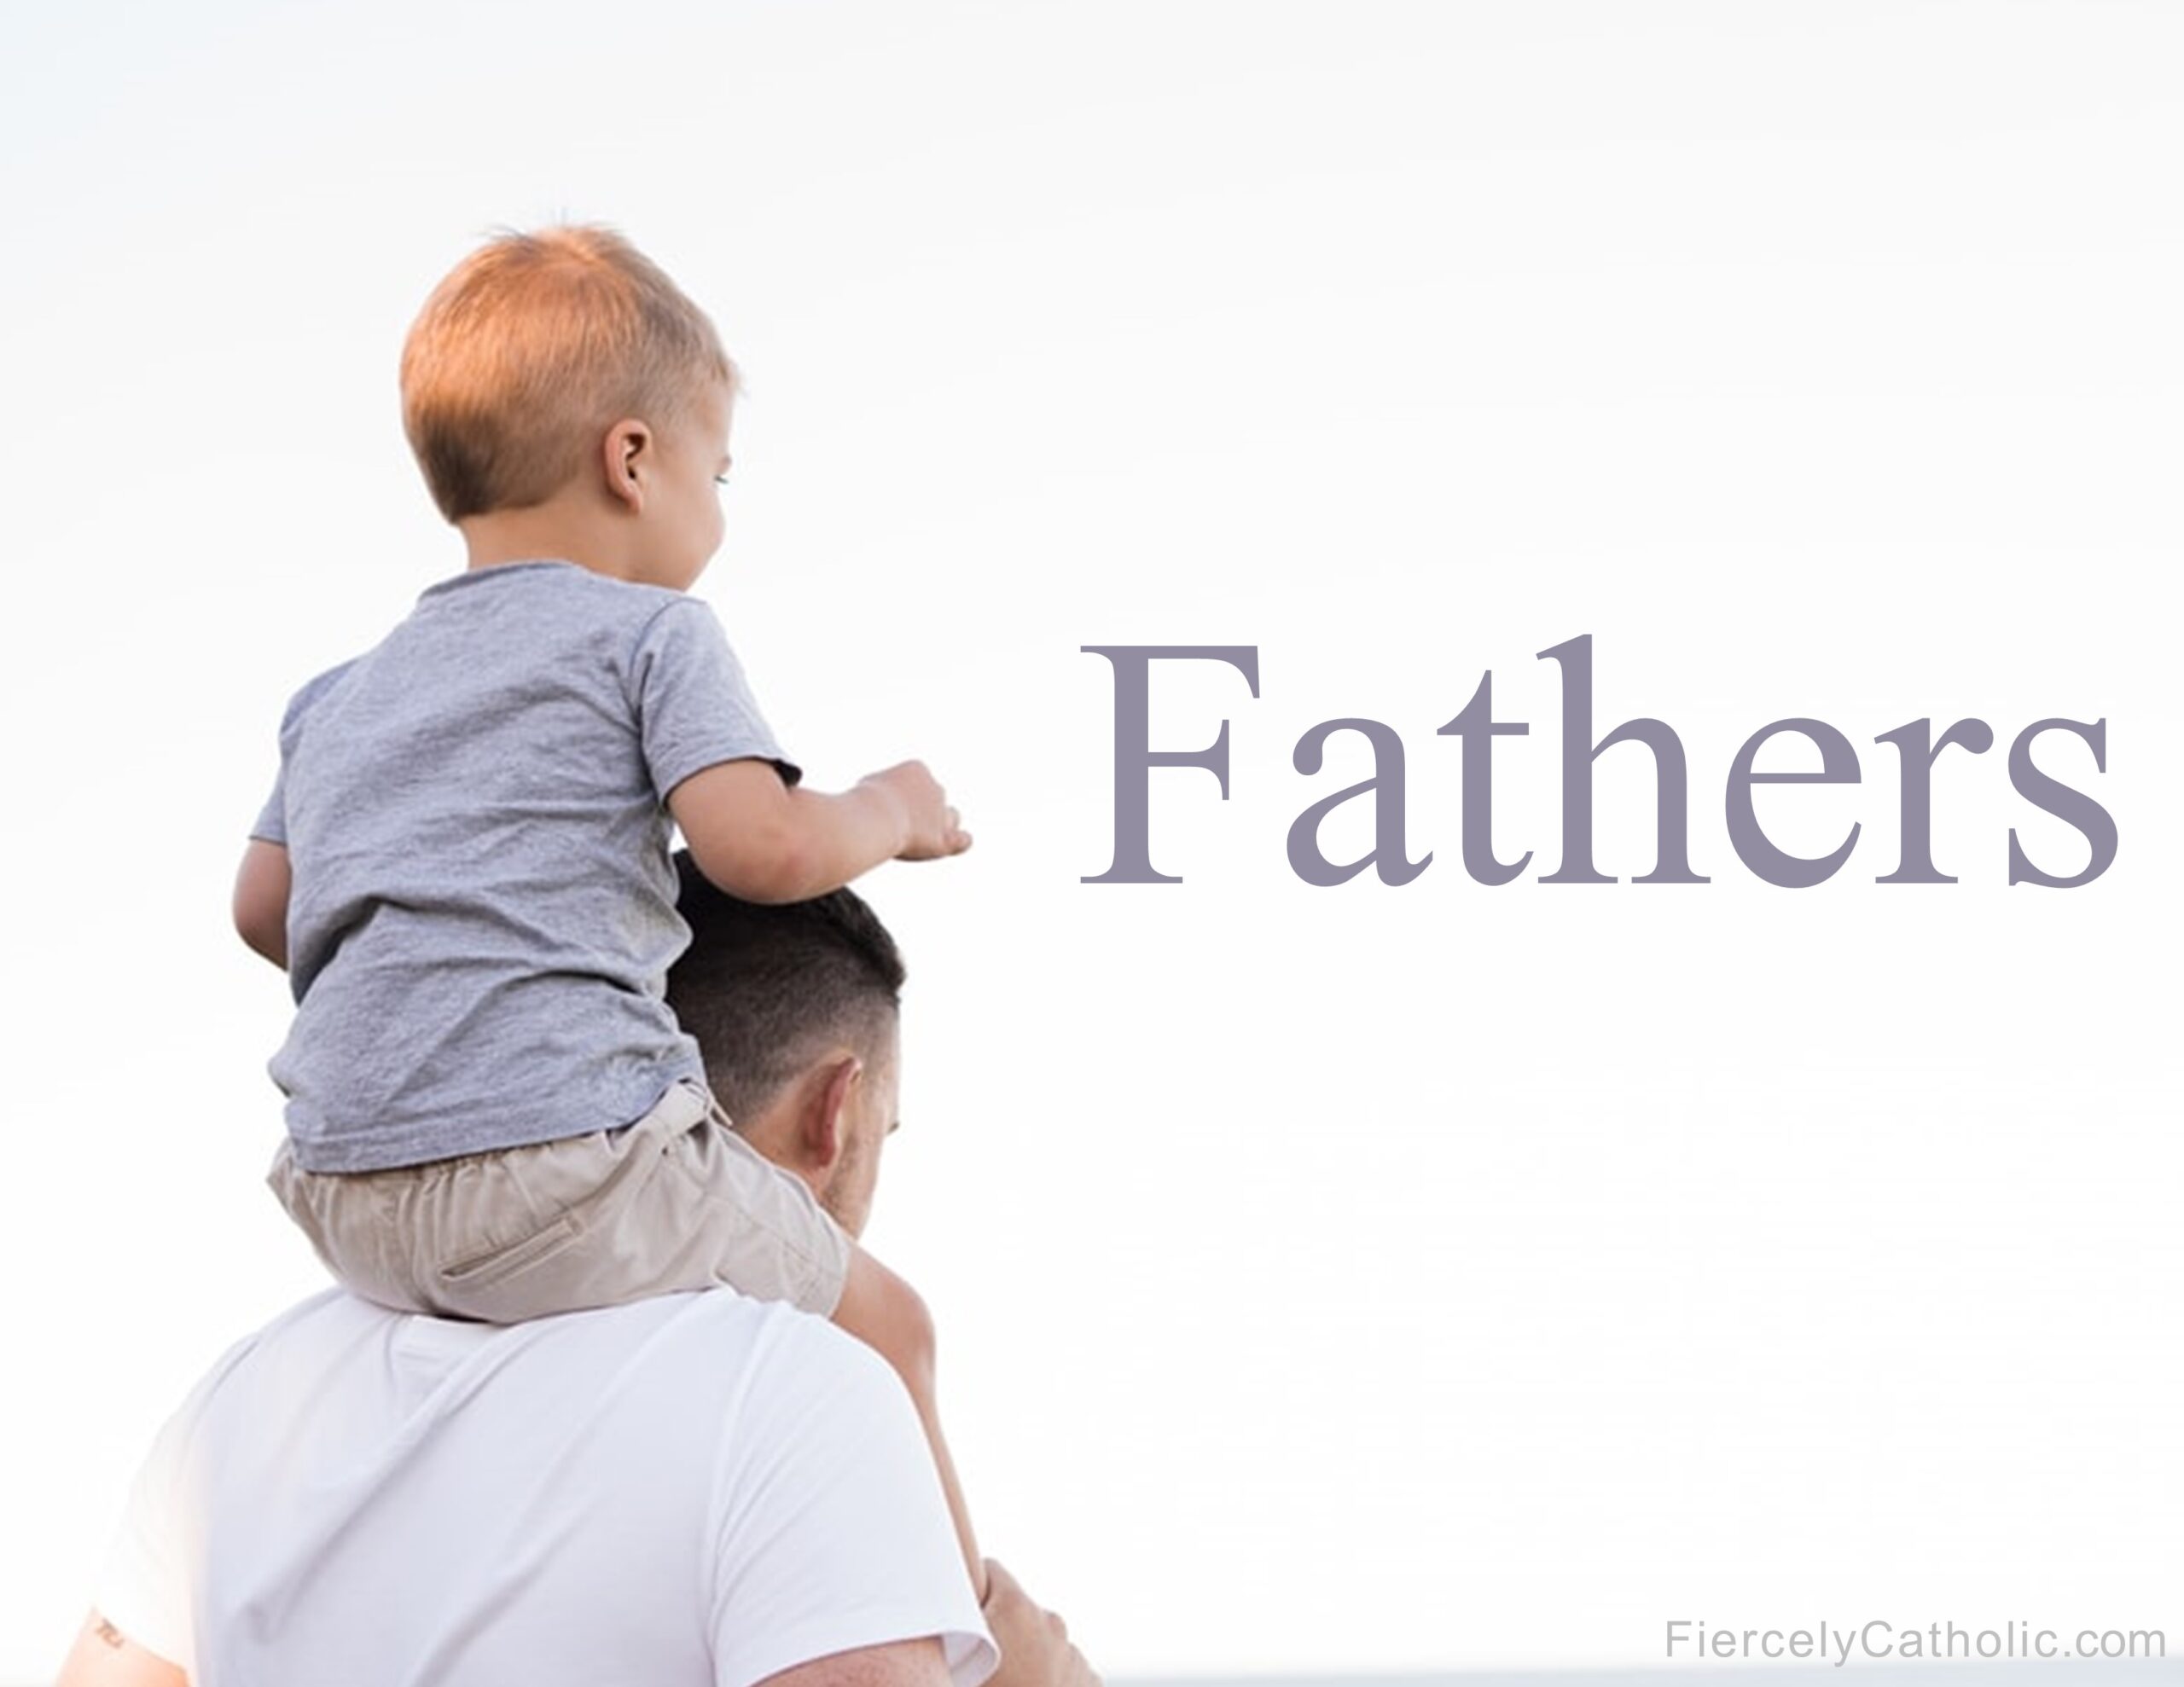 Fathers